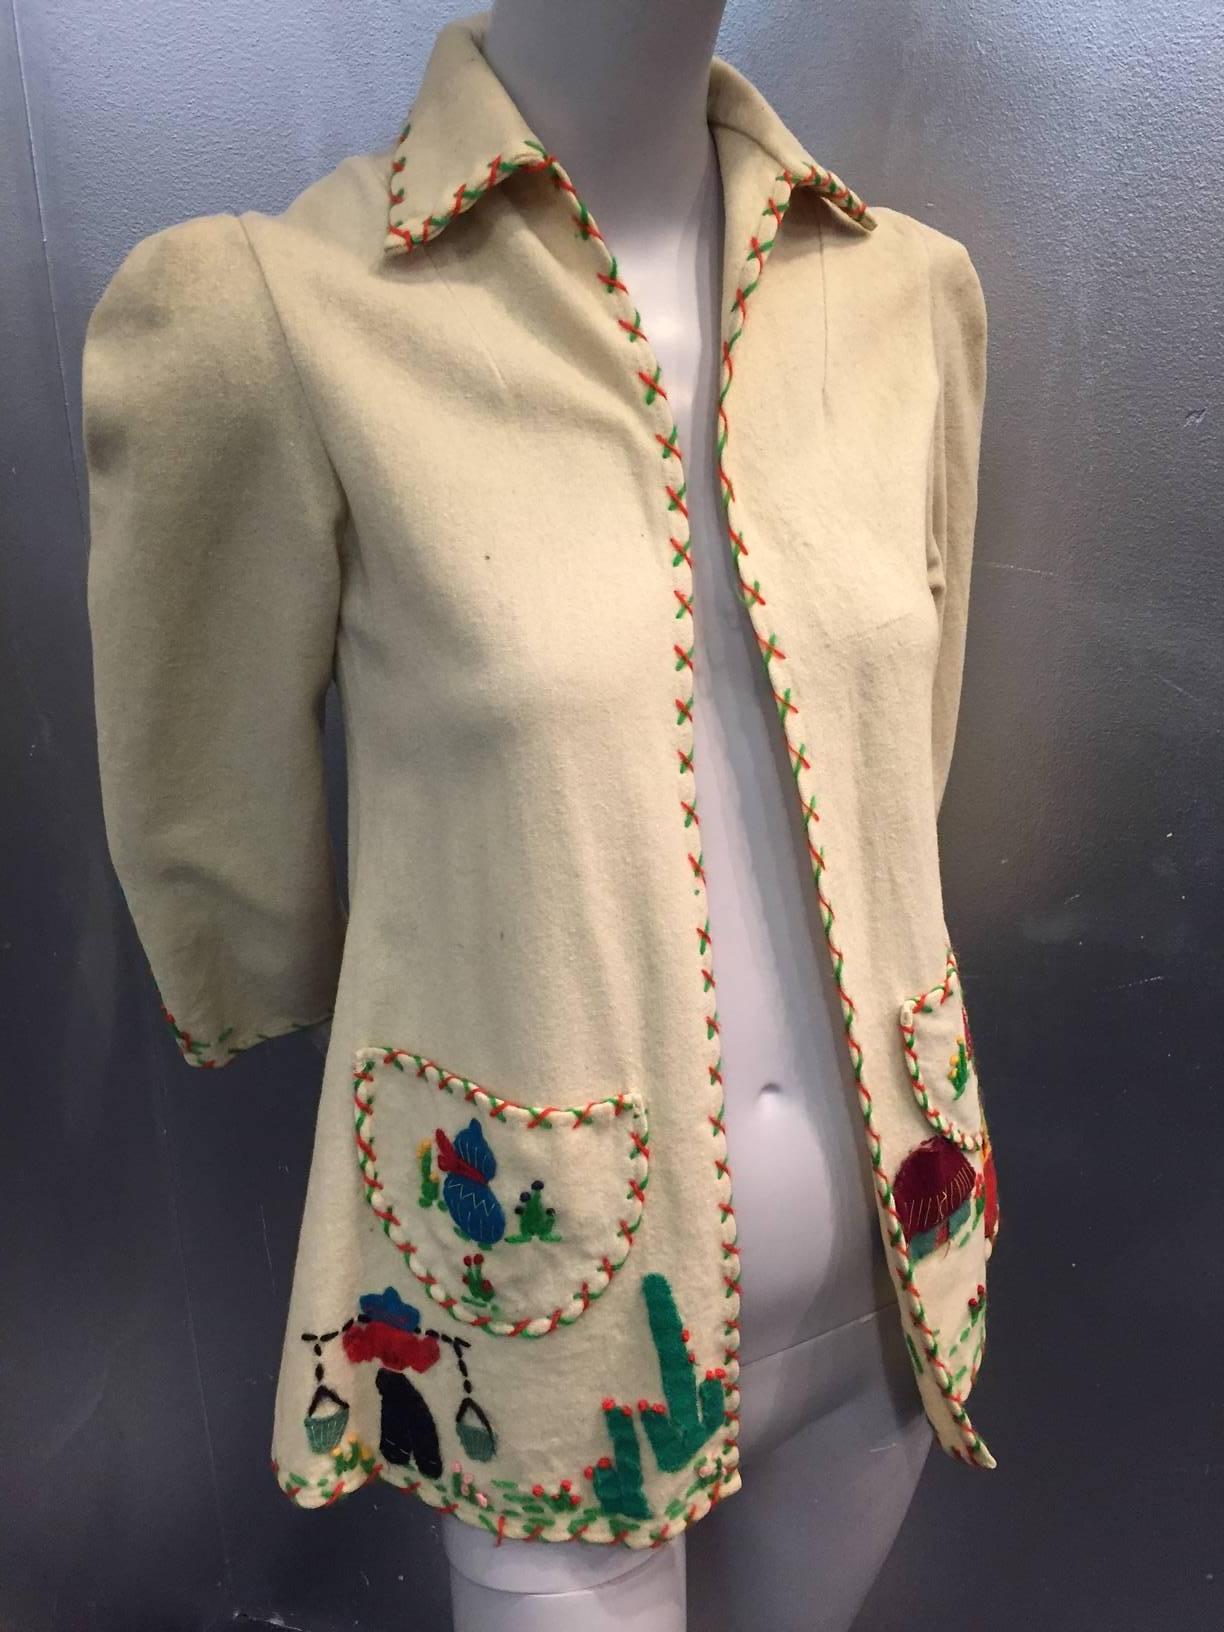 1940s wool felt Mexico souvenir jacket with elaborate applique in felt of dancing couple on back and cactus and figures on front and patch pockets. No closure. 